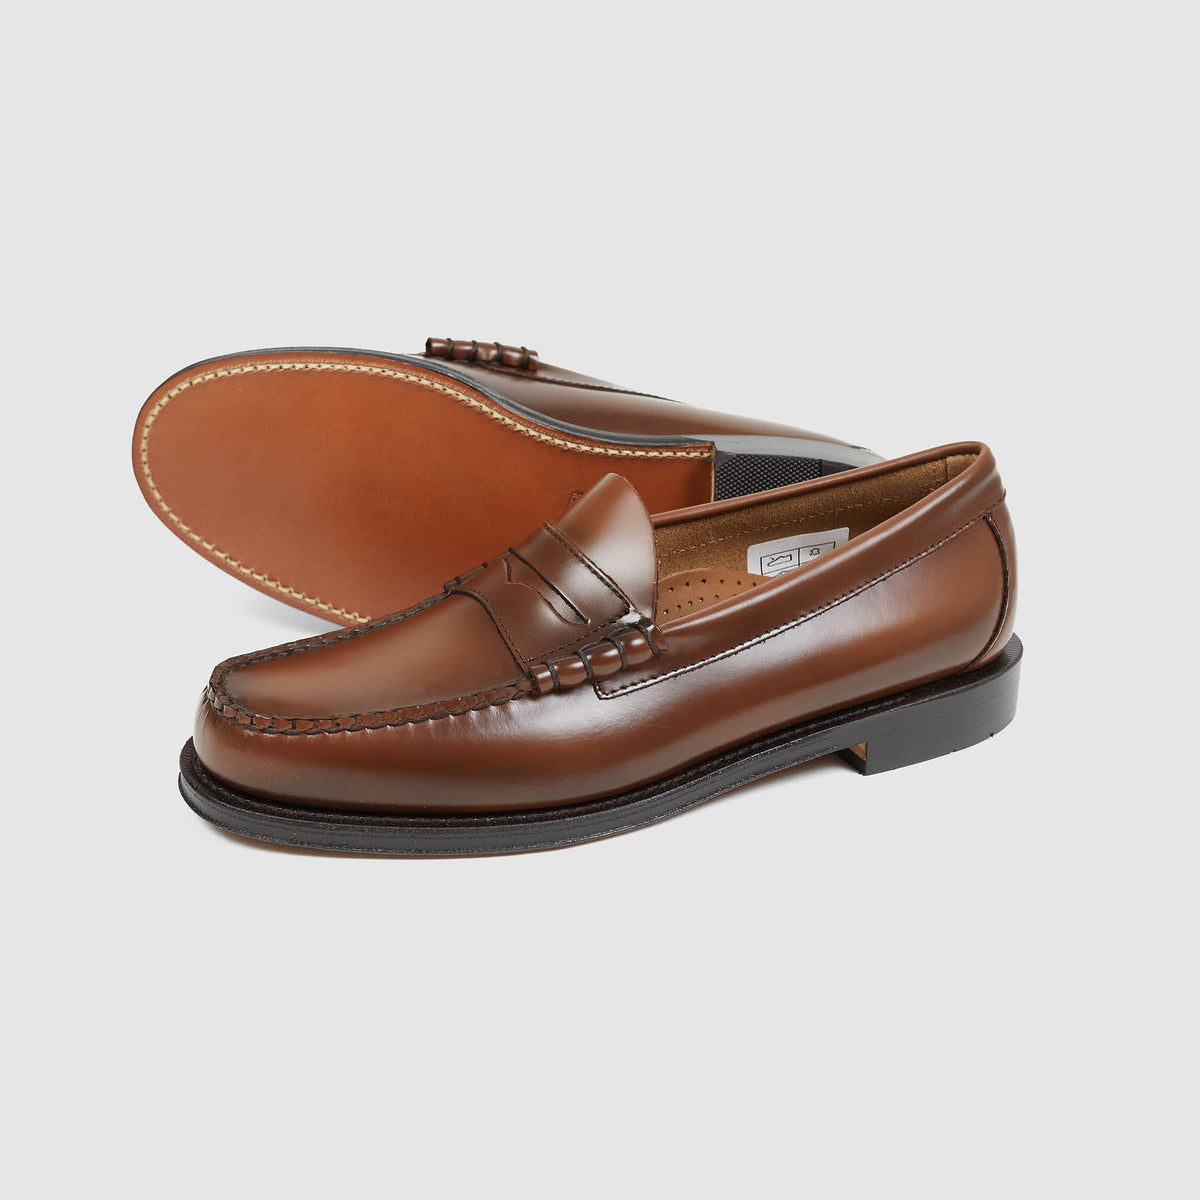 & Co. Weejuns Loafers - DeeCee style